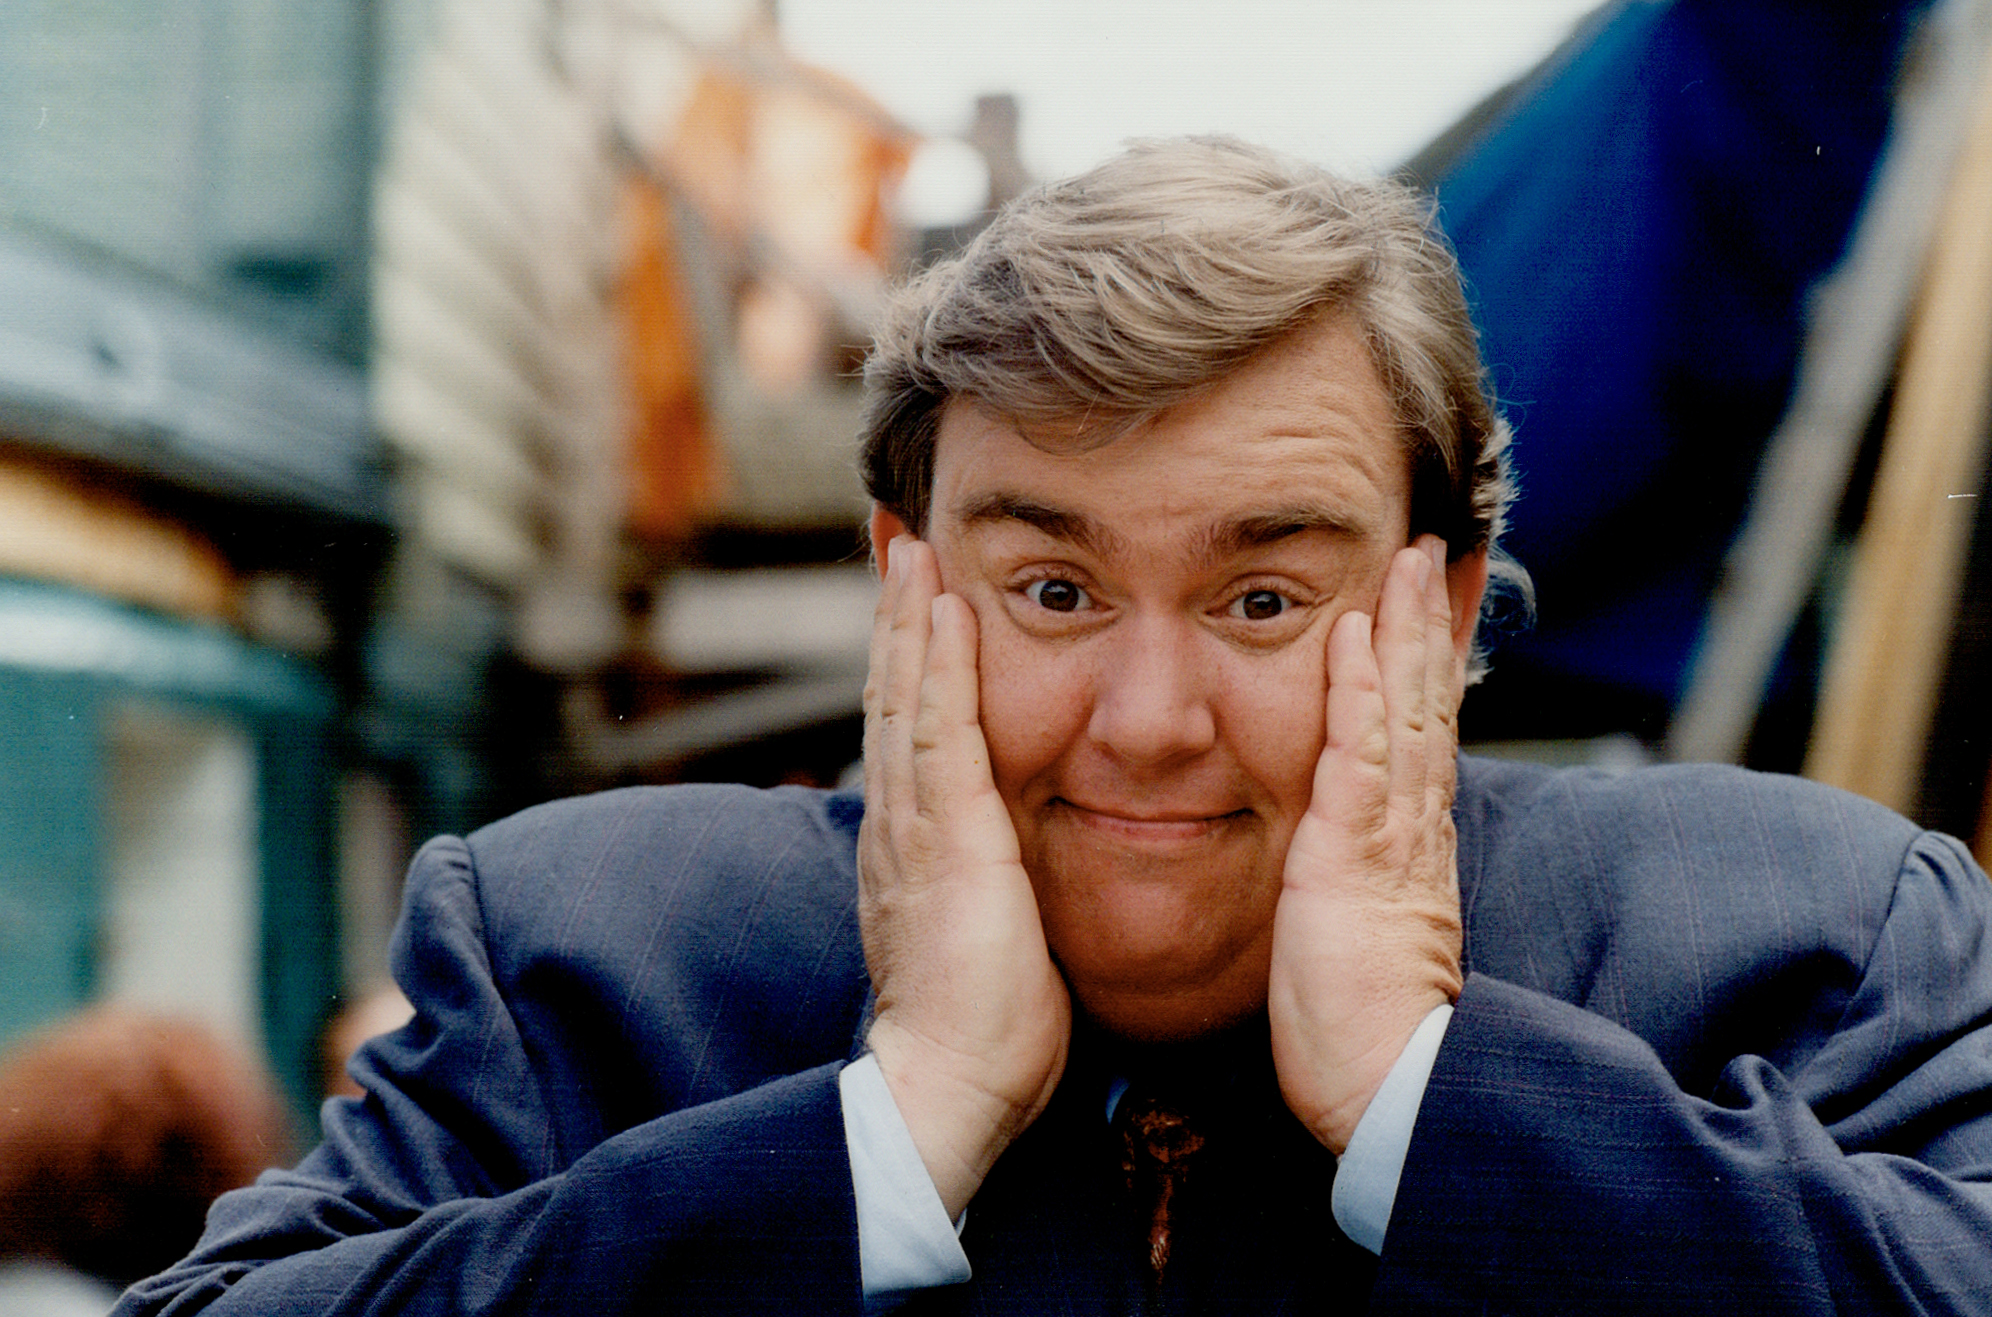 John Candy on March 5, 1994, Toronto, Canada | Source: Getty Images